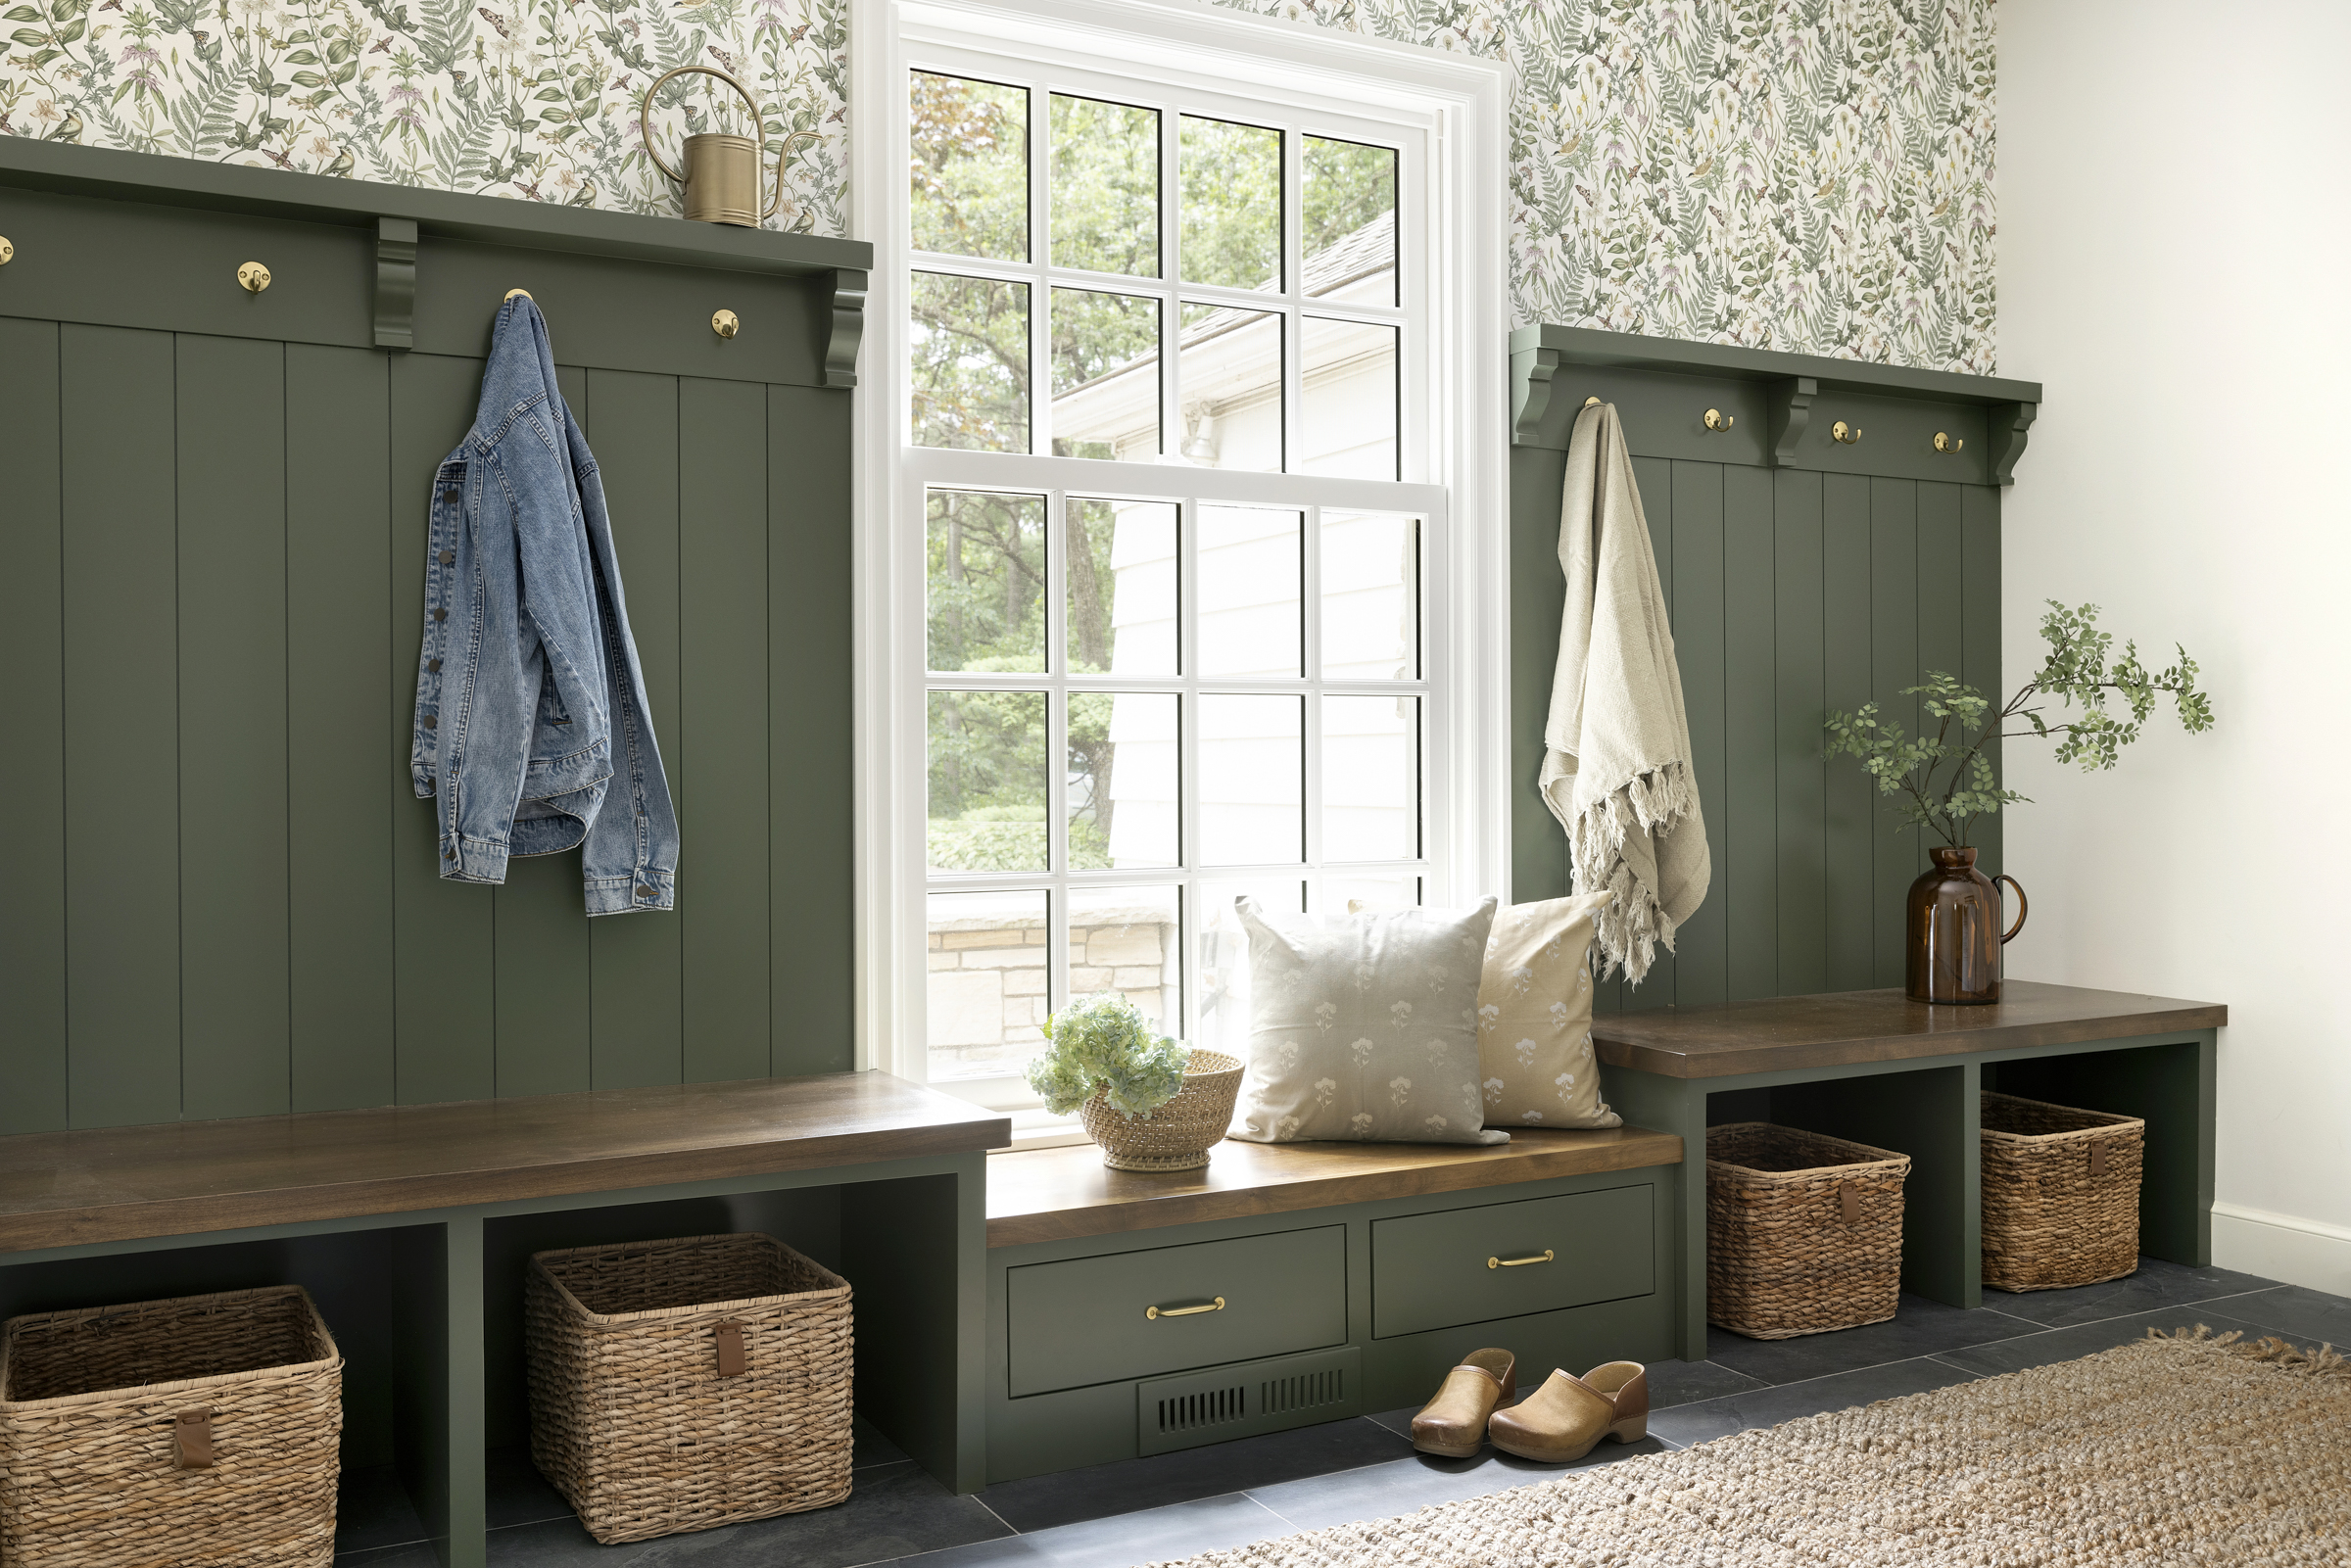 Open mudroom storage with brass hooks, and wallpaper paired with green cabinetry.